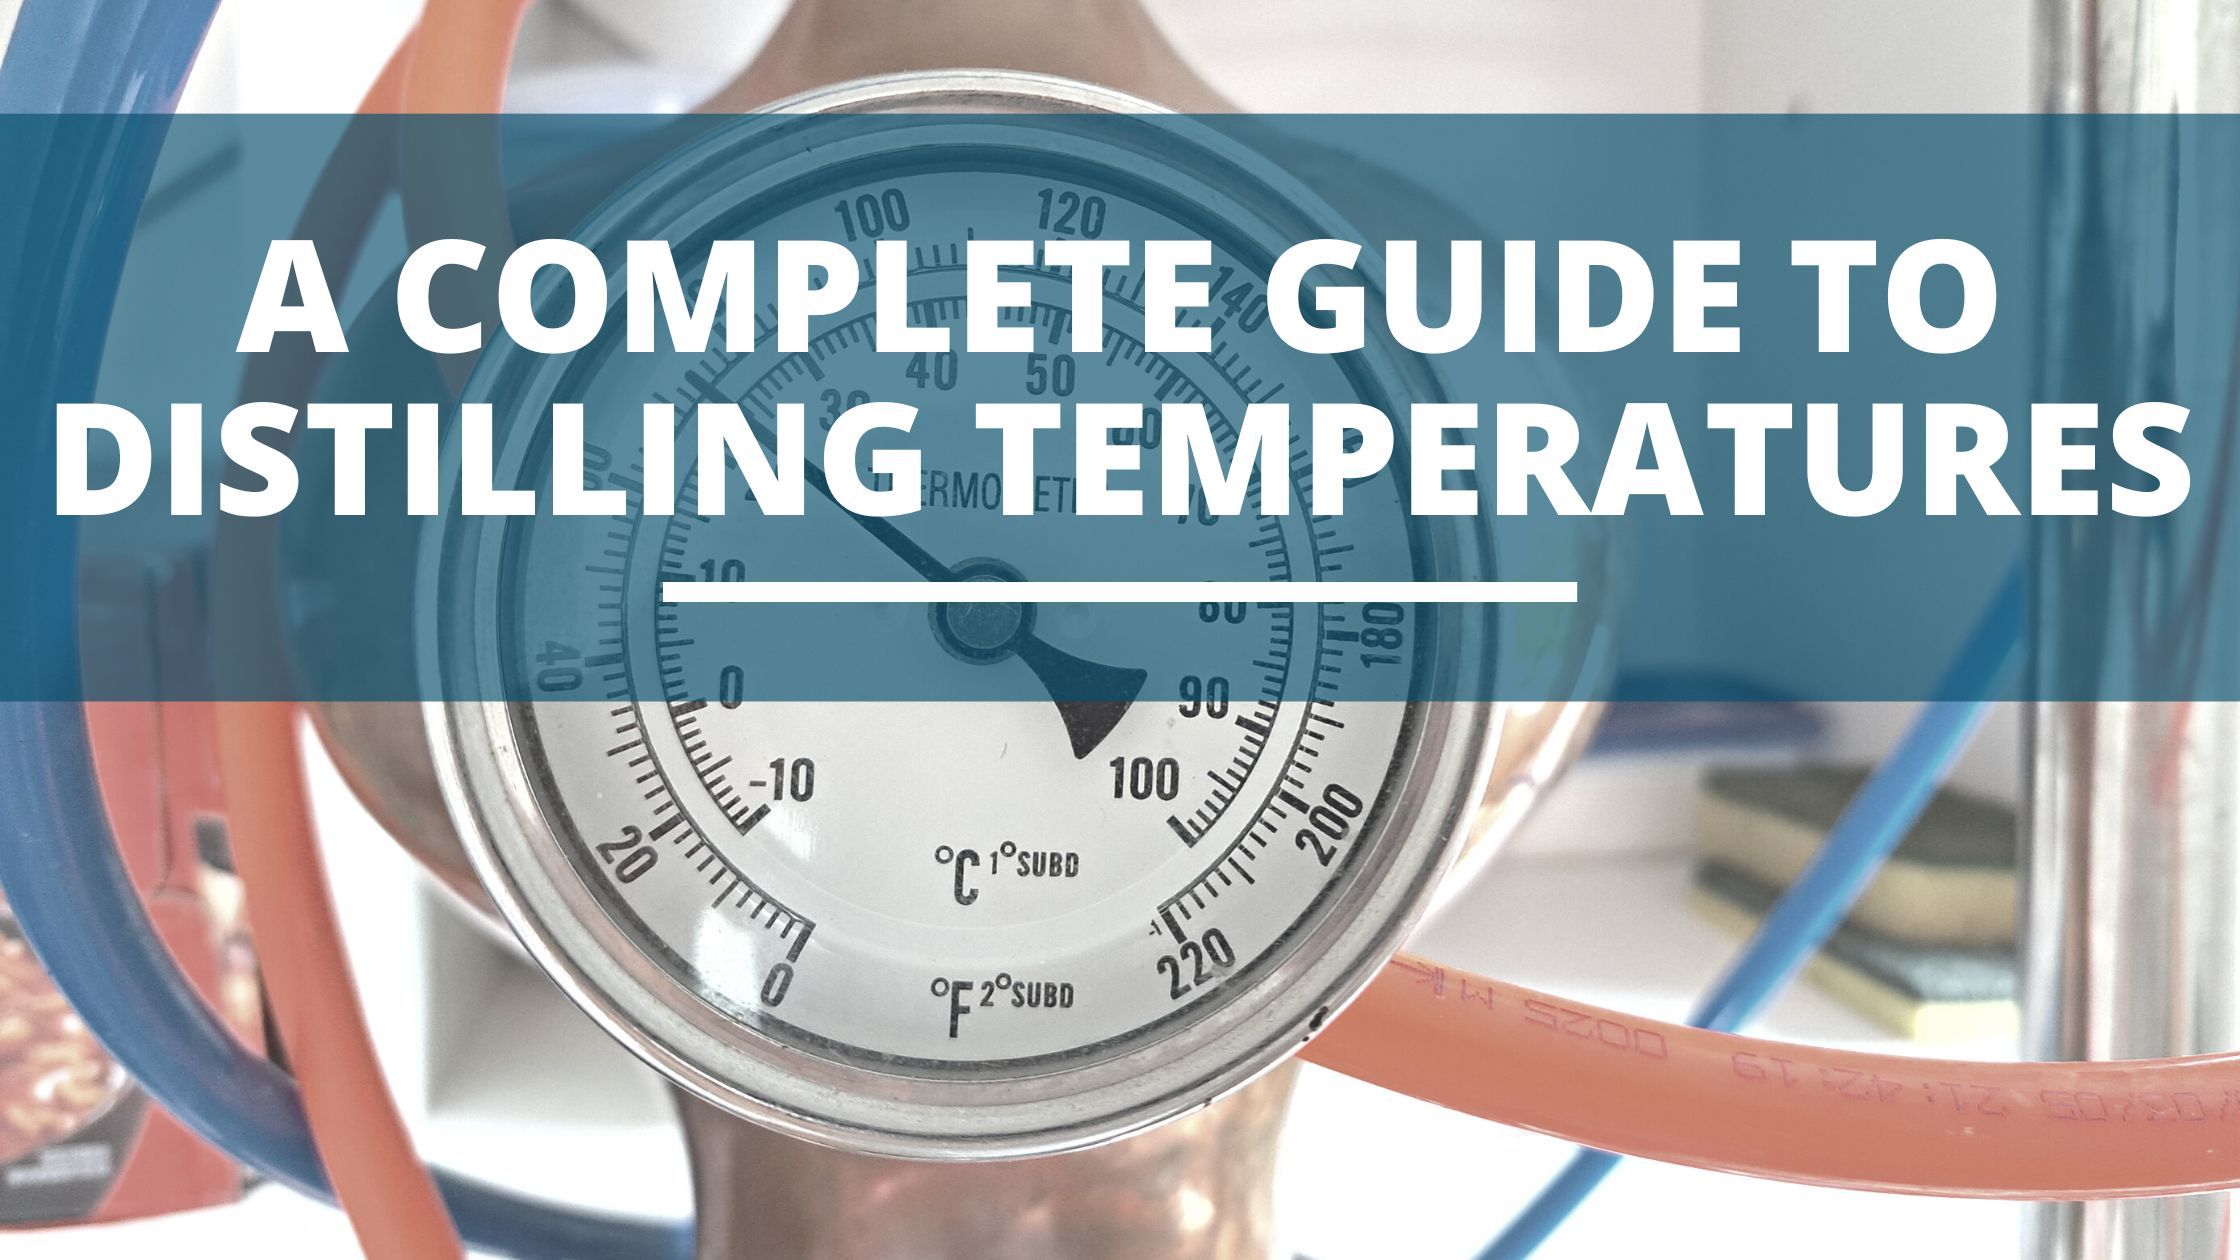 A Complete Guide To Distillation Temperatures (Explained!) DIY Distilling